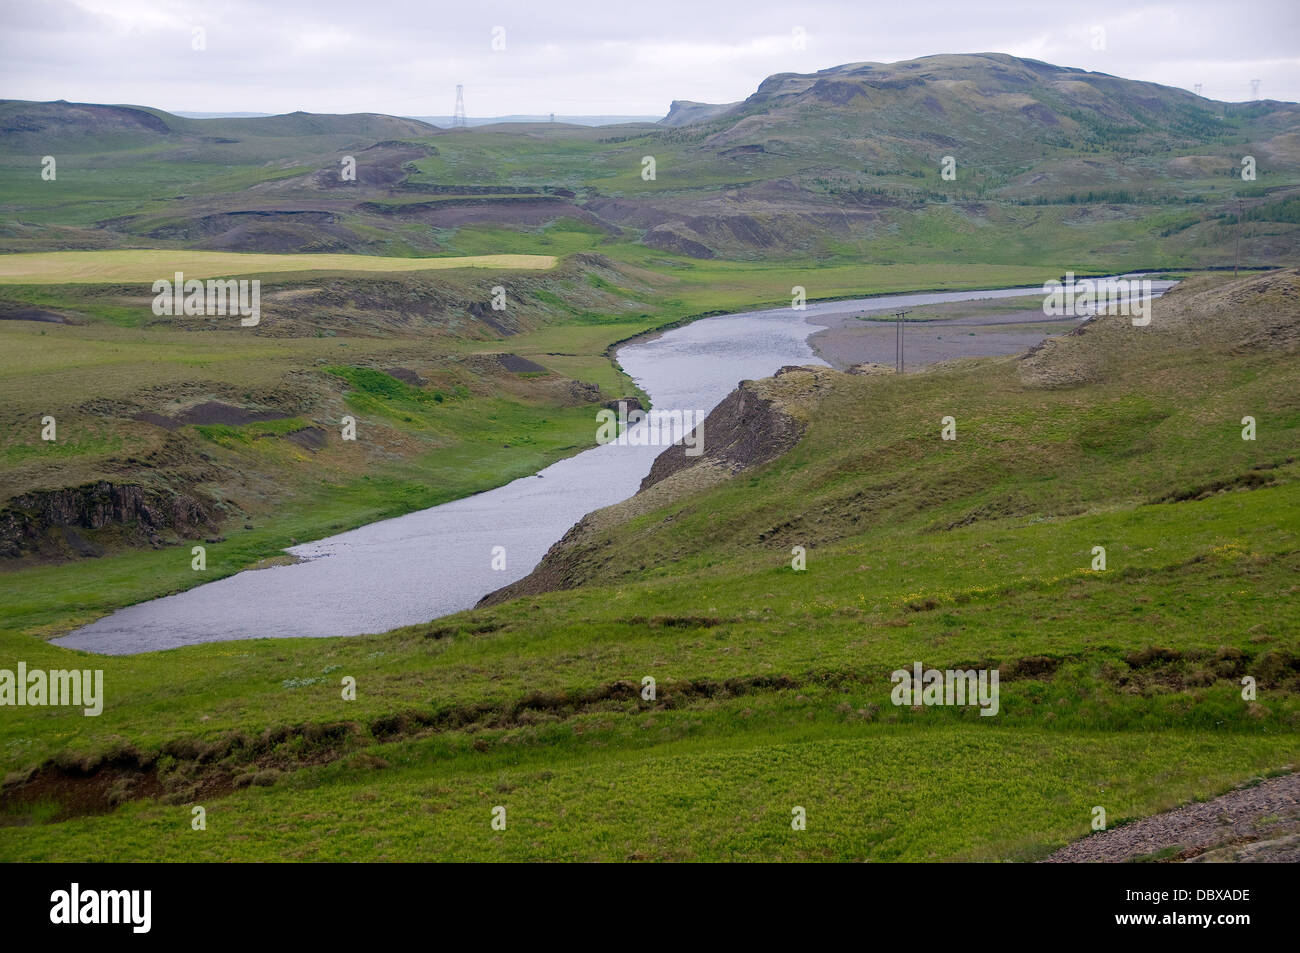 A salmon fly fisherman's dream is one of Iceland's most-productive, scenic rivers. Stock Photo